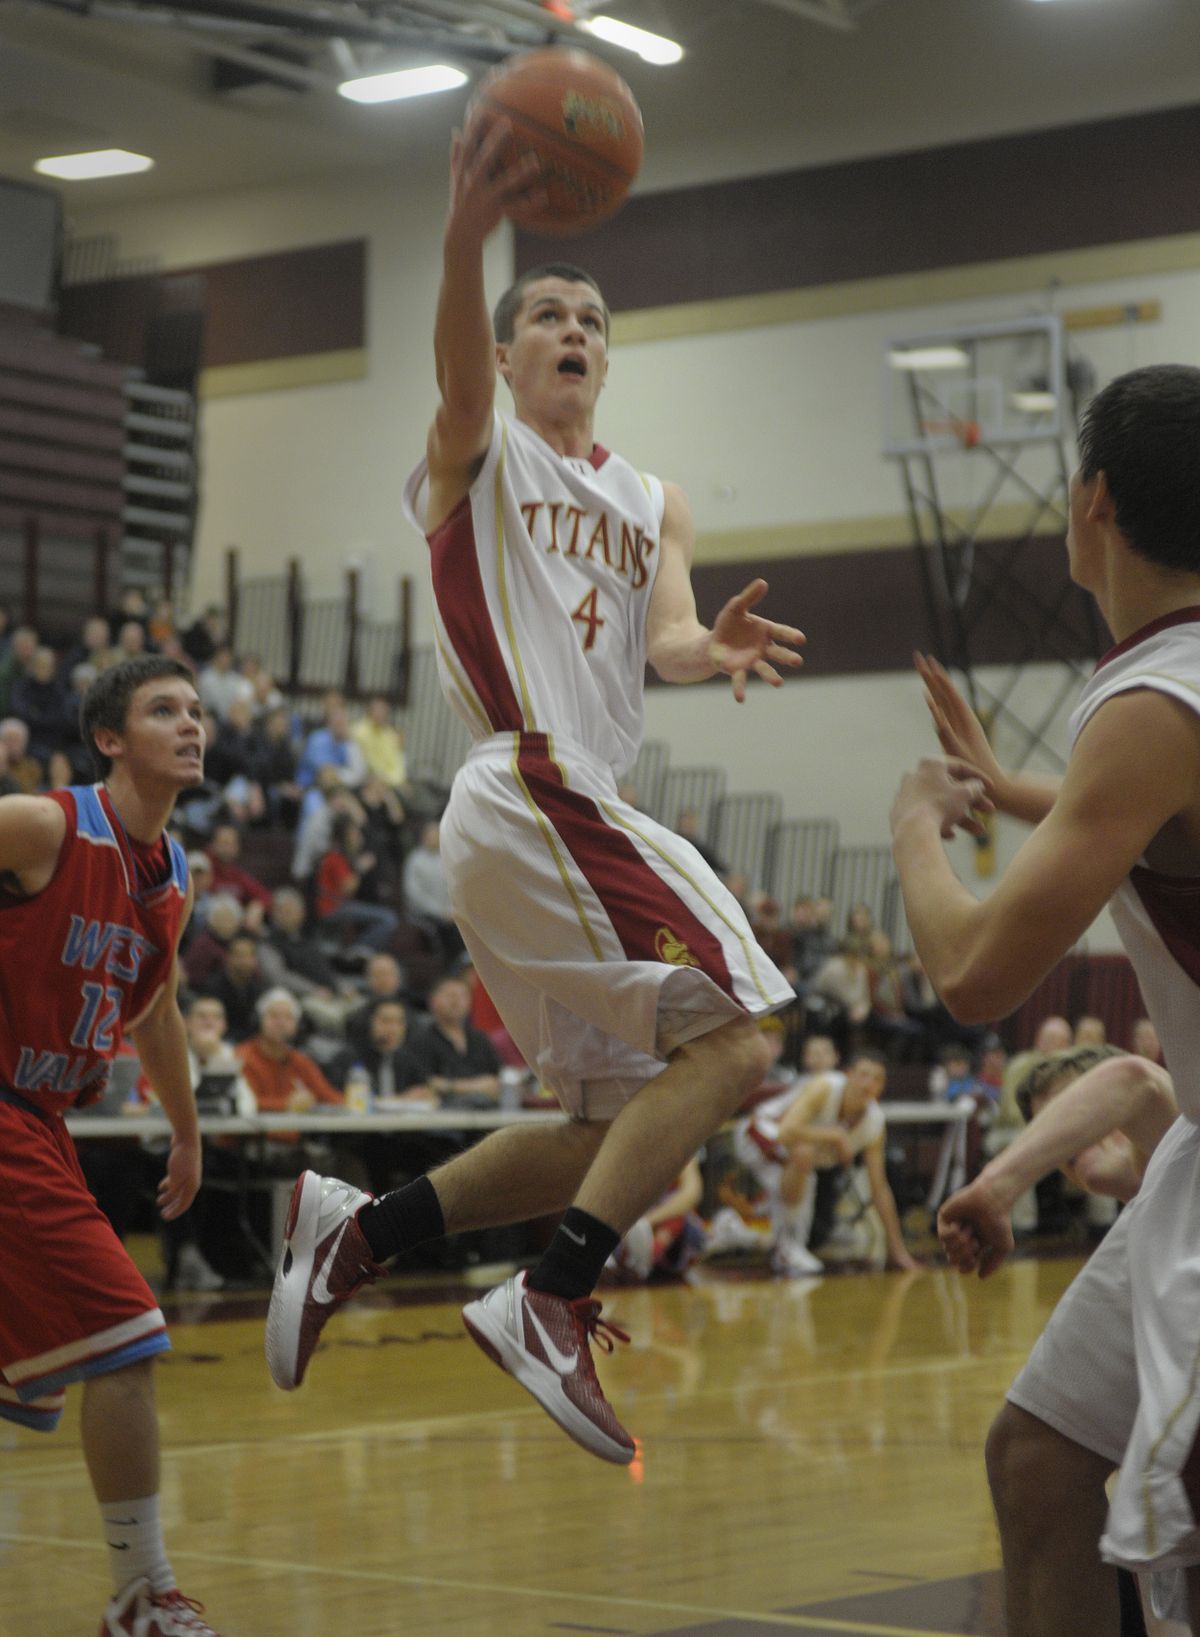 University’s Jared Miller finishes his drive to the basket with a layup. (Christopher Anderson)